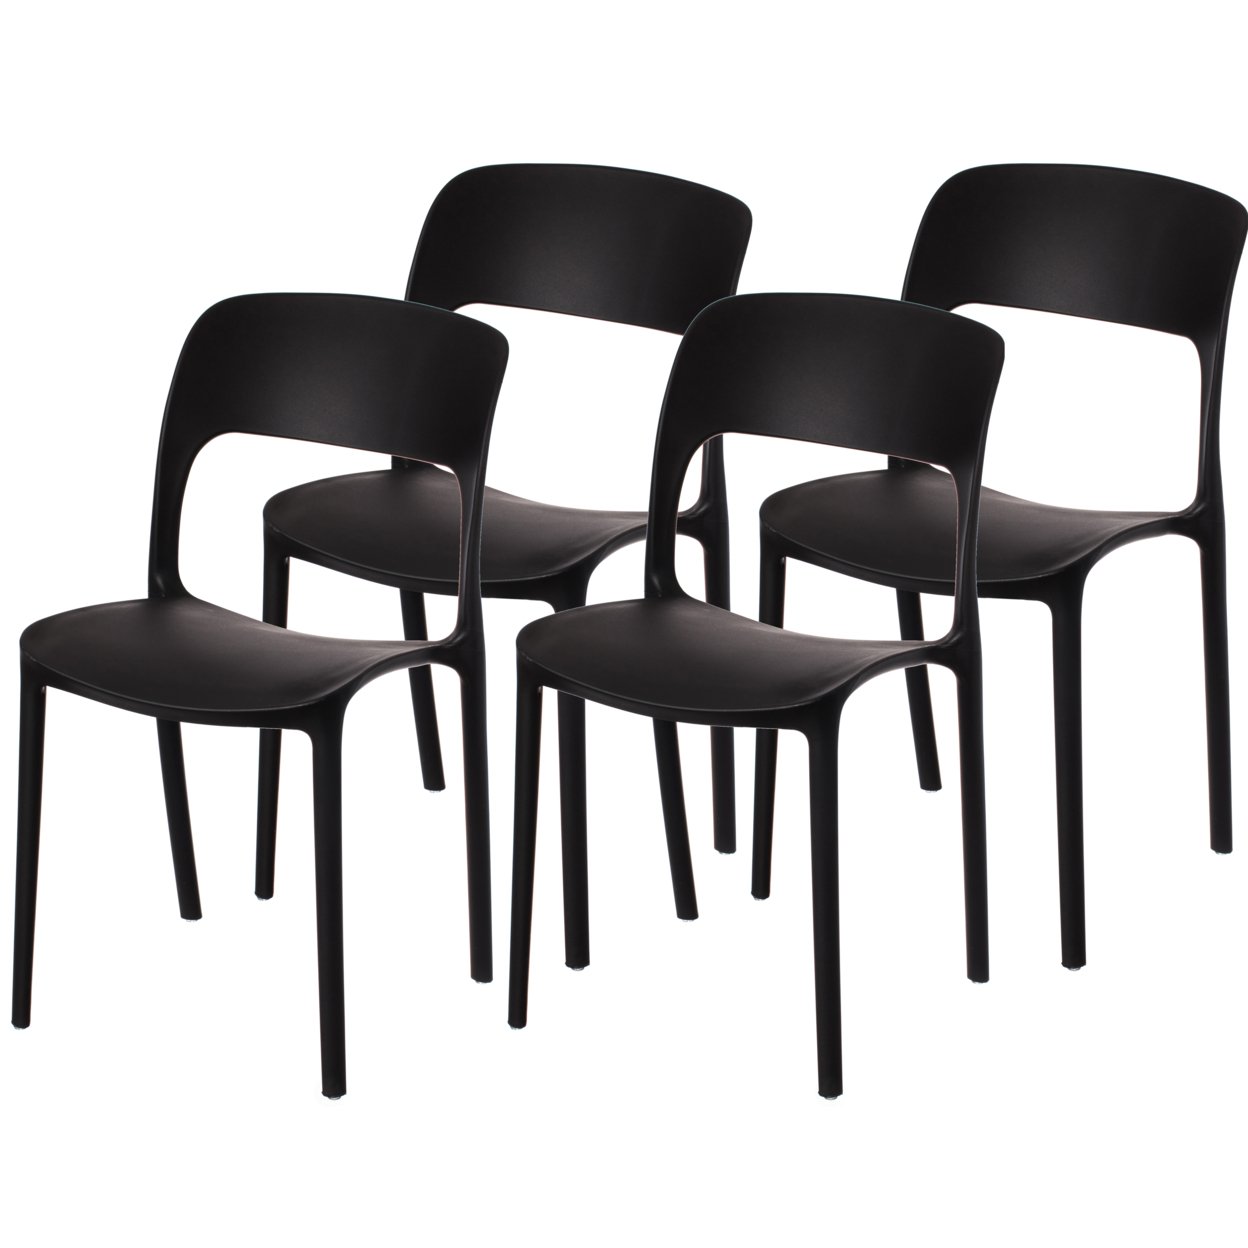 Modern Plastic Outdoor Dining Chair With Open Curved Back - Set Of 4 Black